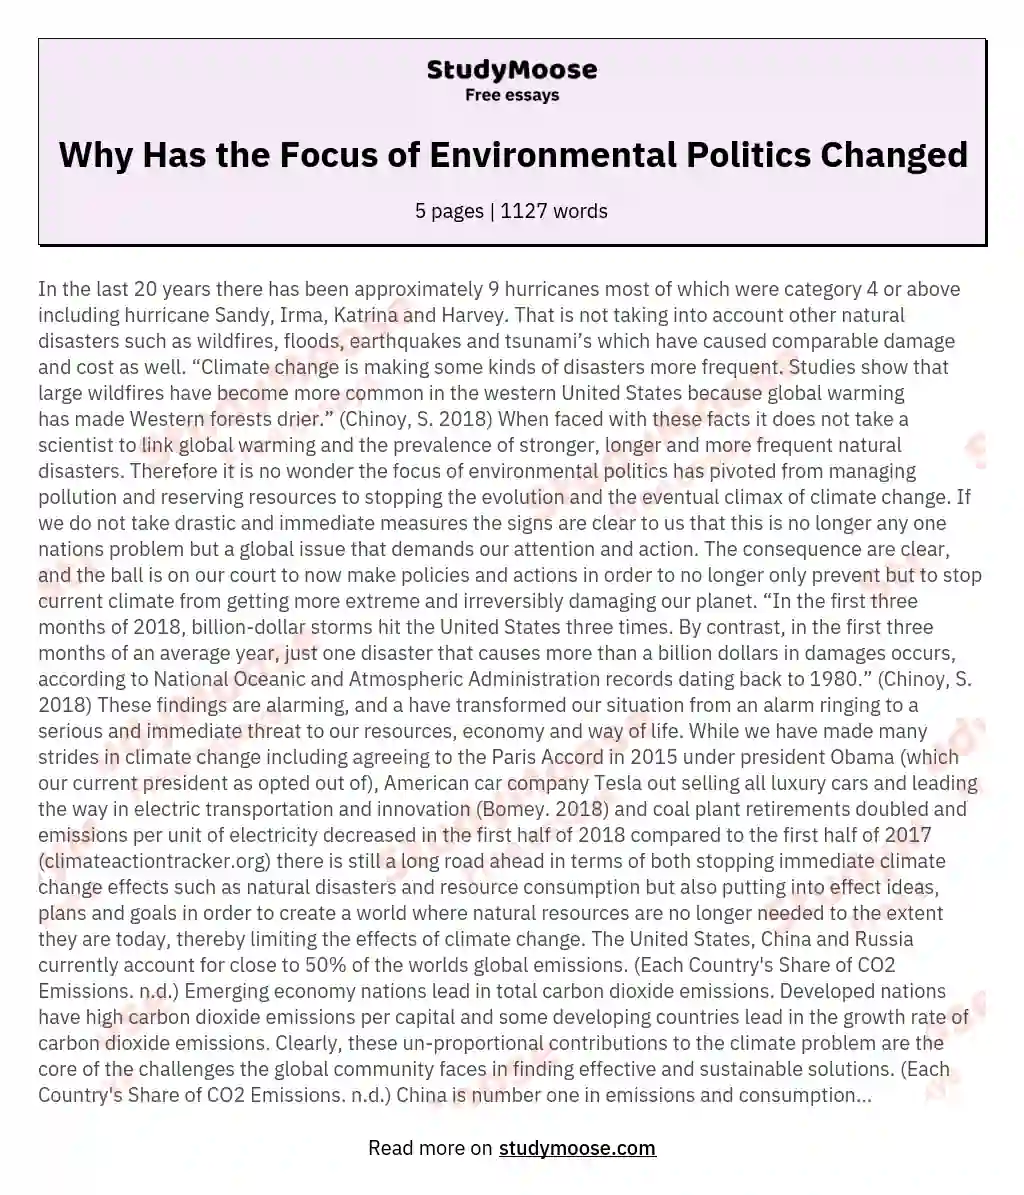 Why Has the Focus of Environmental Politics Changed essay